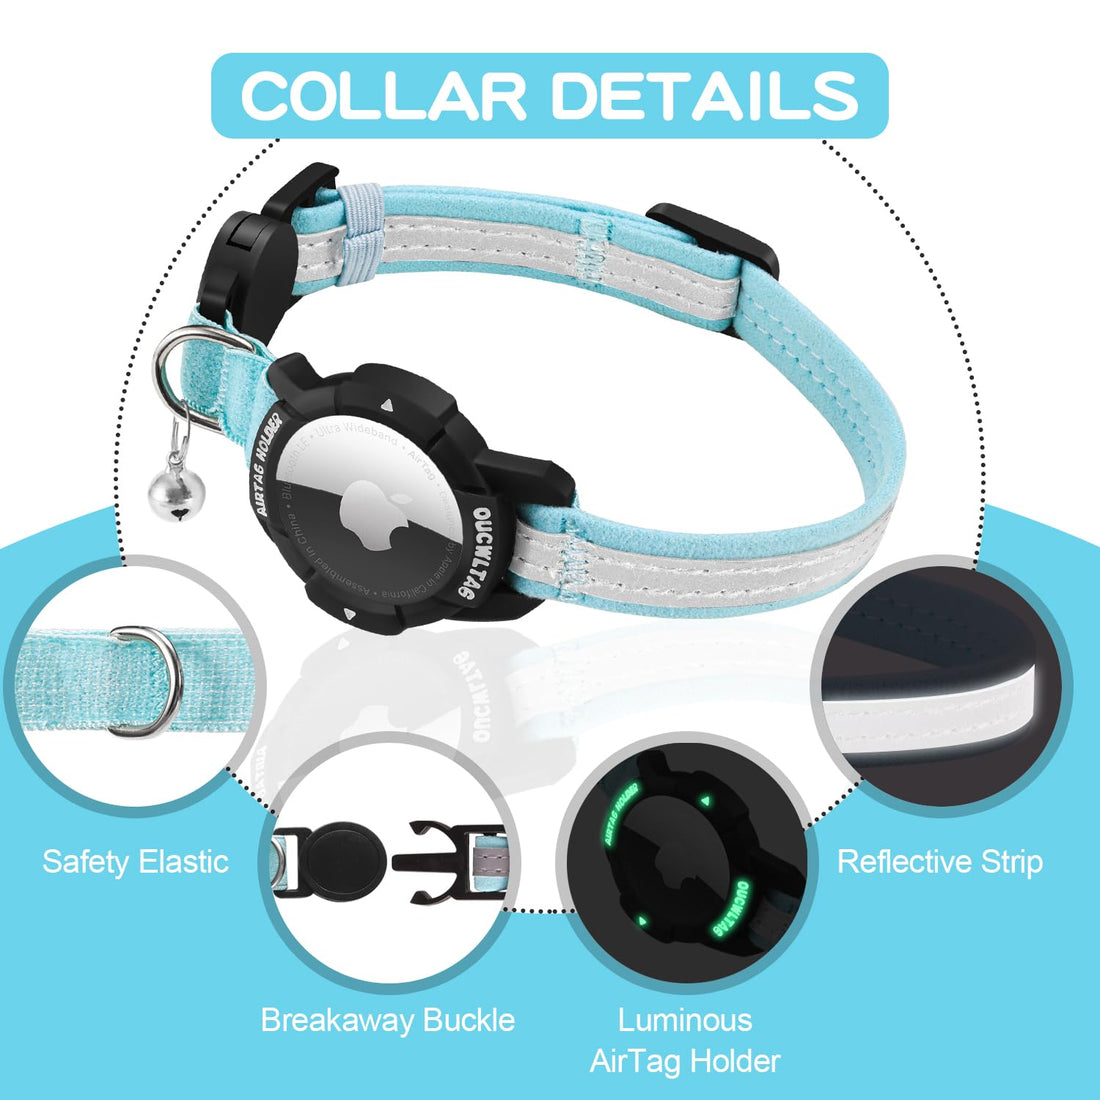 Reflective AirTag Cat Collar Breakaway, OUCWLTAG GPS Cat Collar with Luminous Apple Air Tag Holder, Cat Tracker Collars with Safety Elastic Band for Girl Boy Cats, Kittens and Puppies